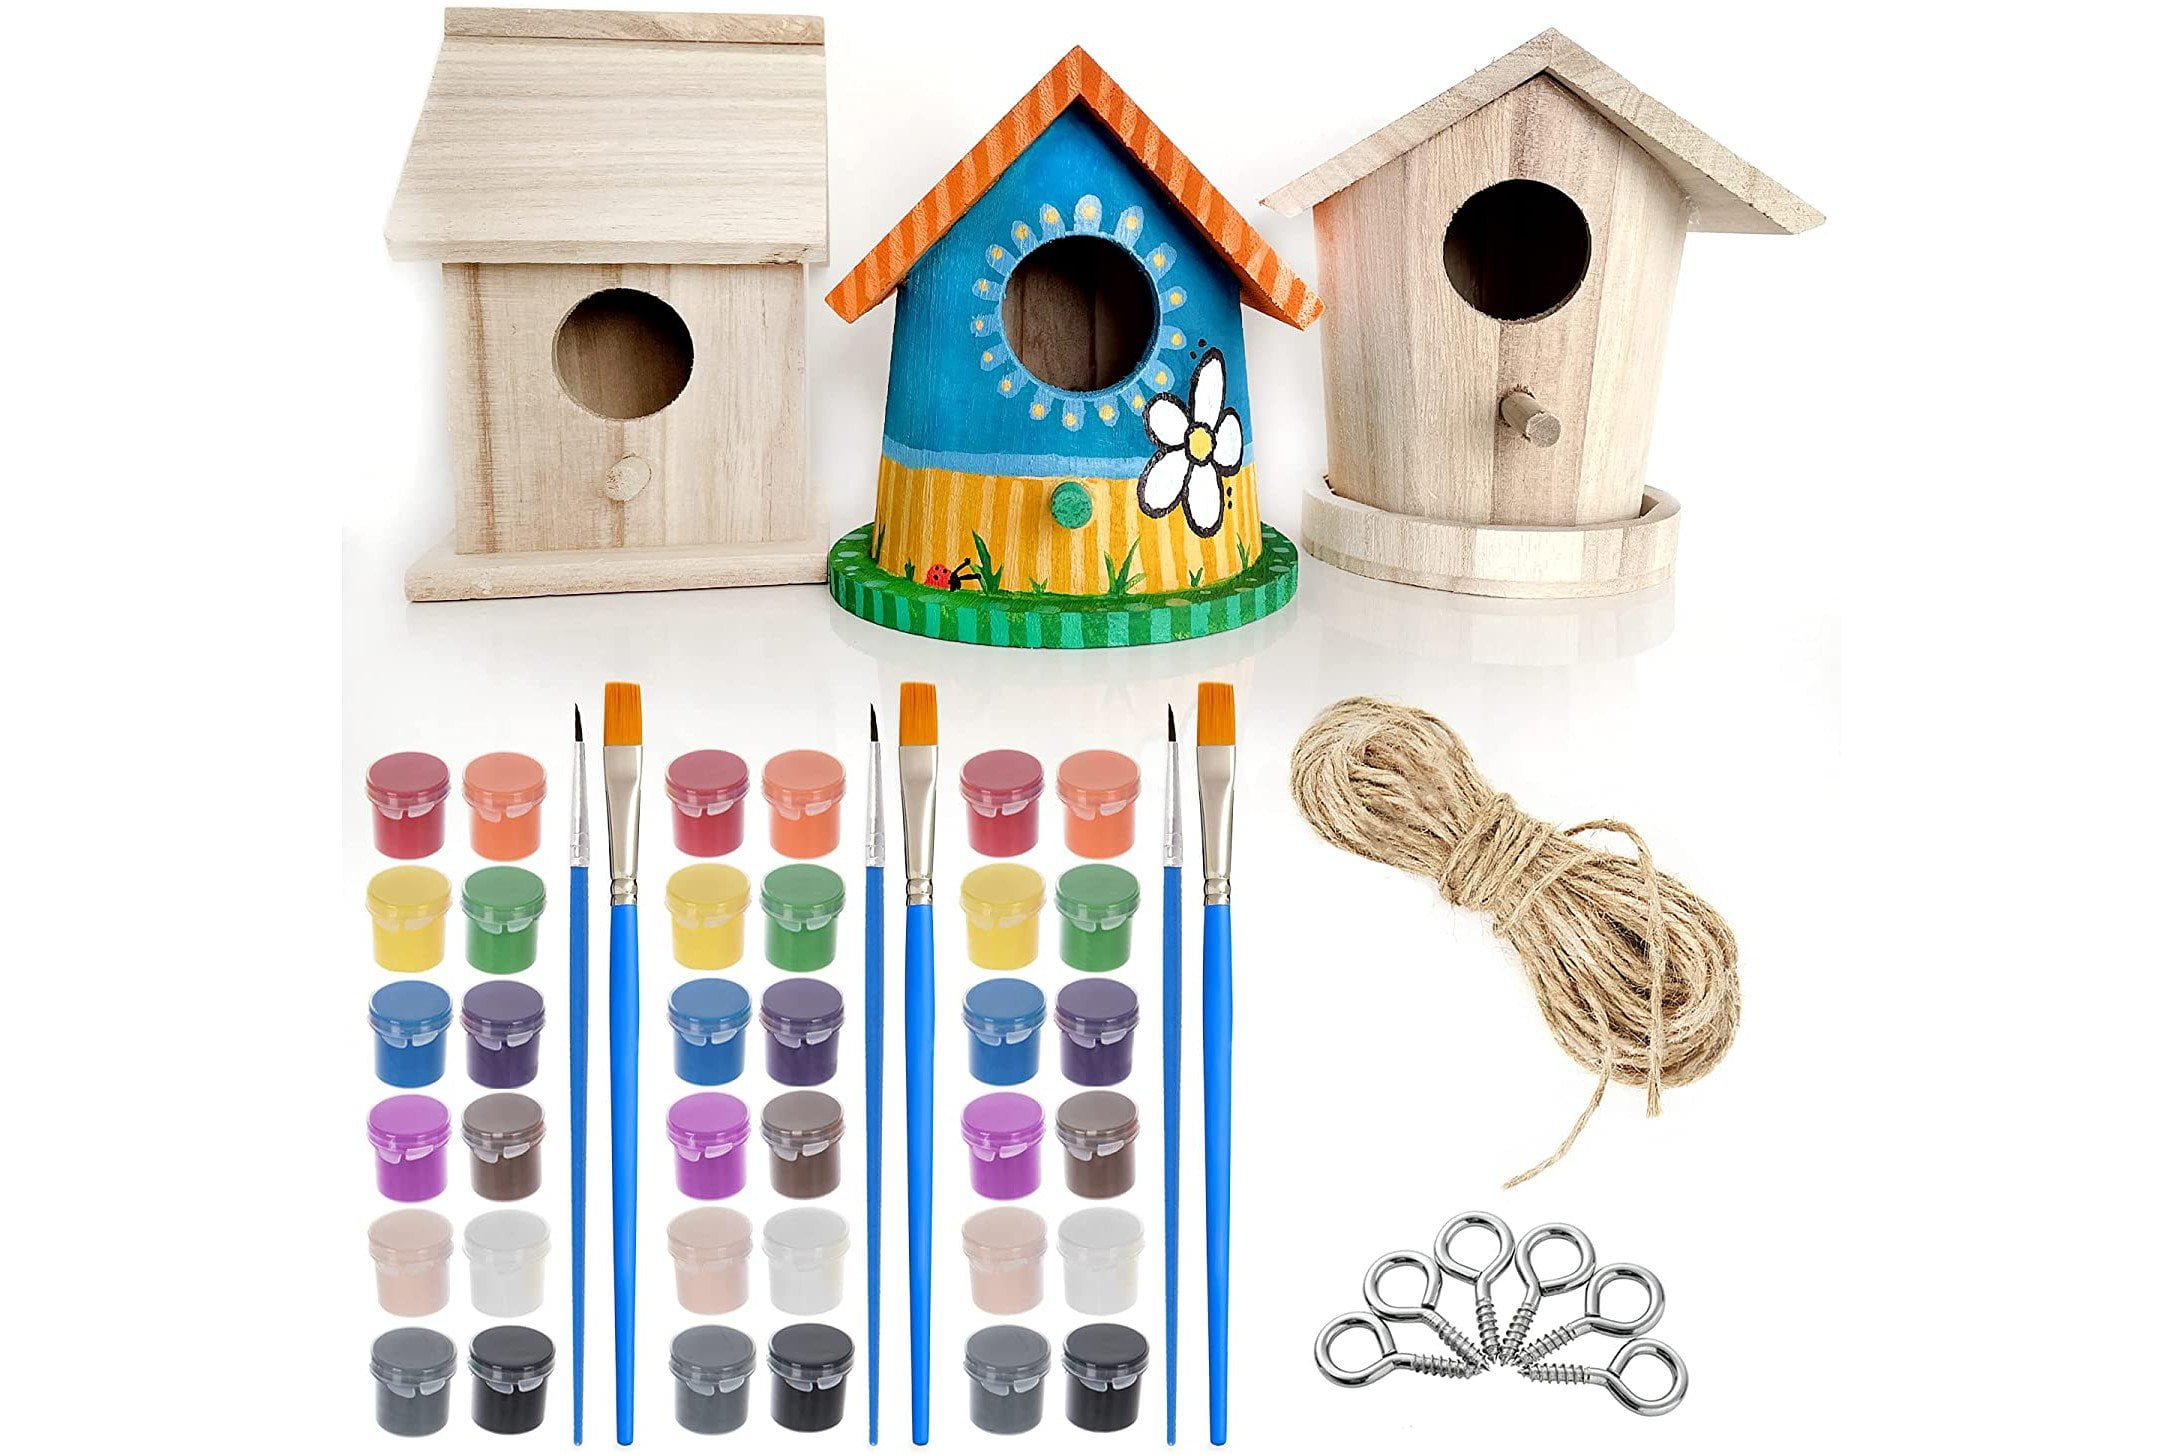 Kids Make Your Own Bird House Unfinished Wood Wooden Craft Project Kit T168 by KidsStuff.com